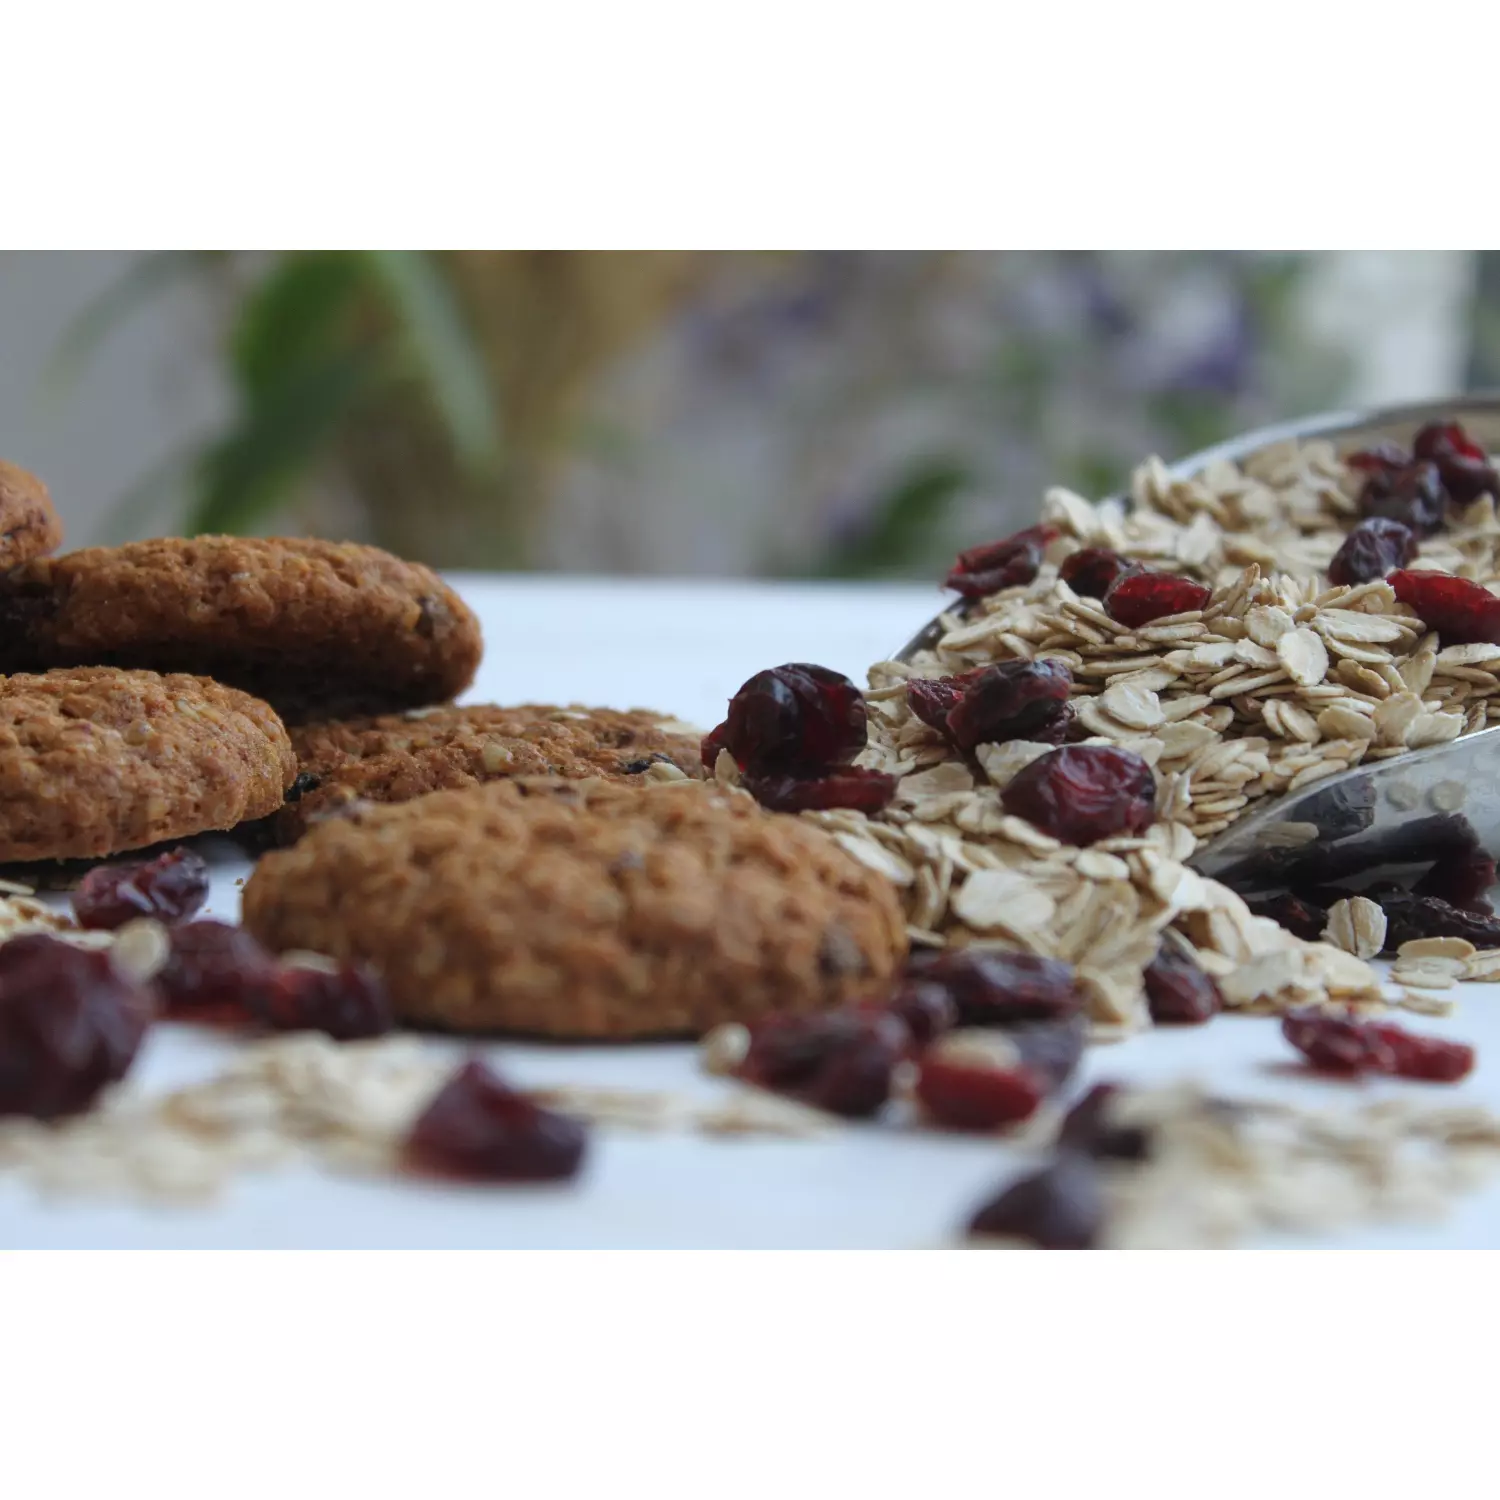 Oatmeal Canberry Cookies hover image